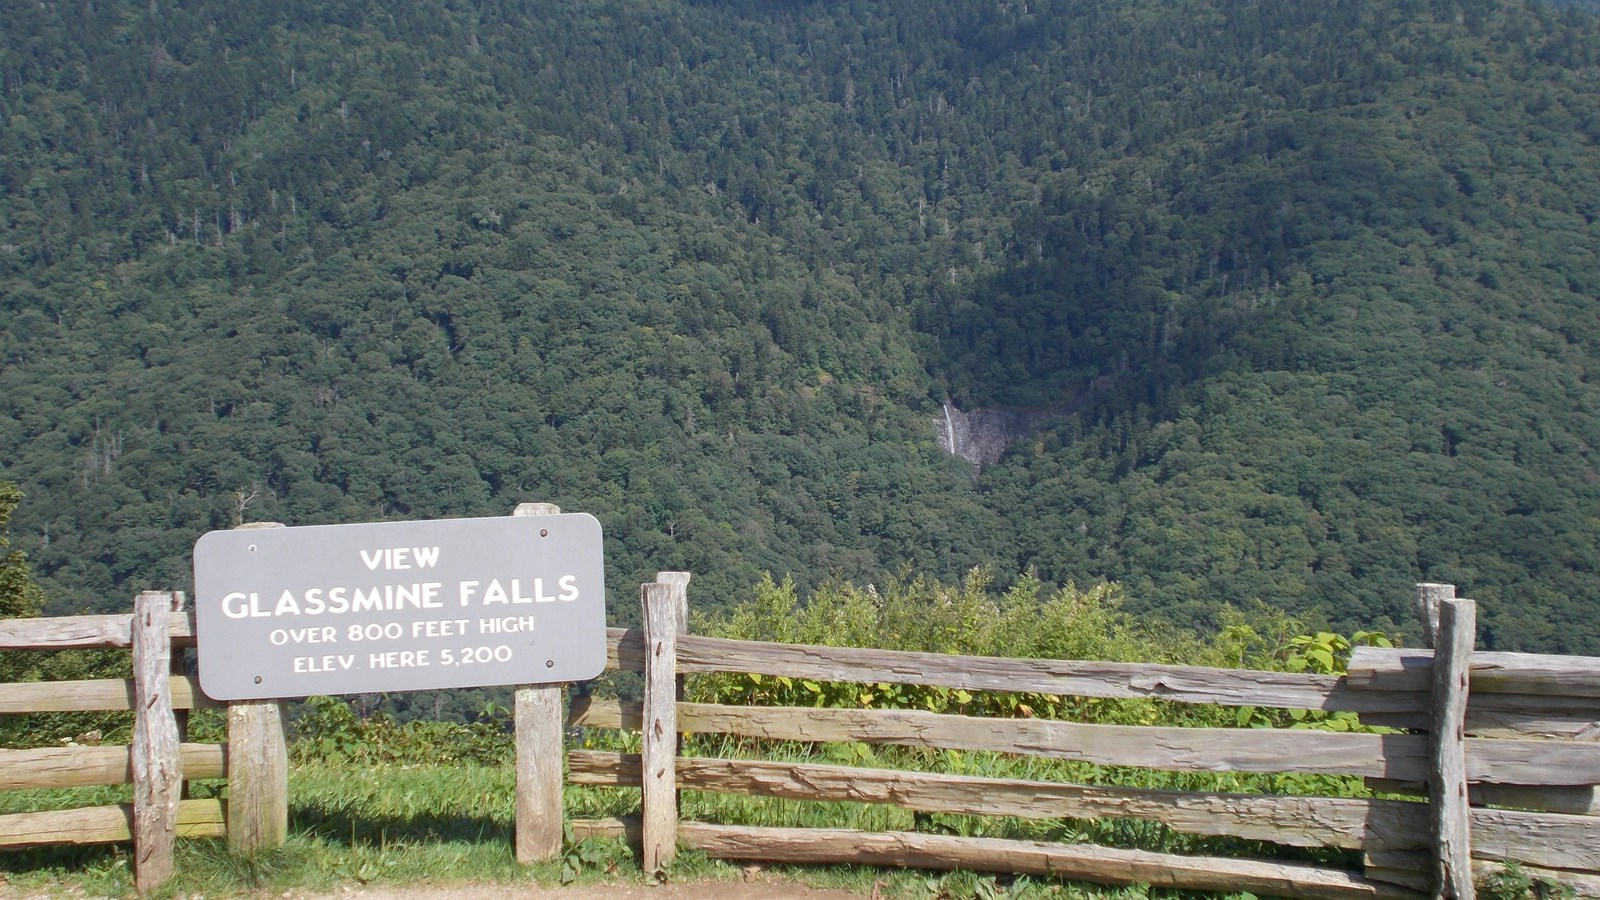 View of a mountain and a tall waterfall with overlook sign and wood fence in the foreground